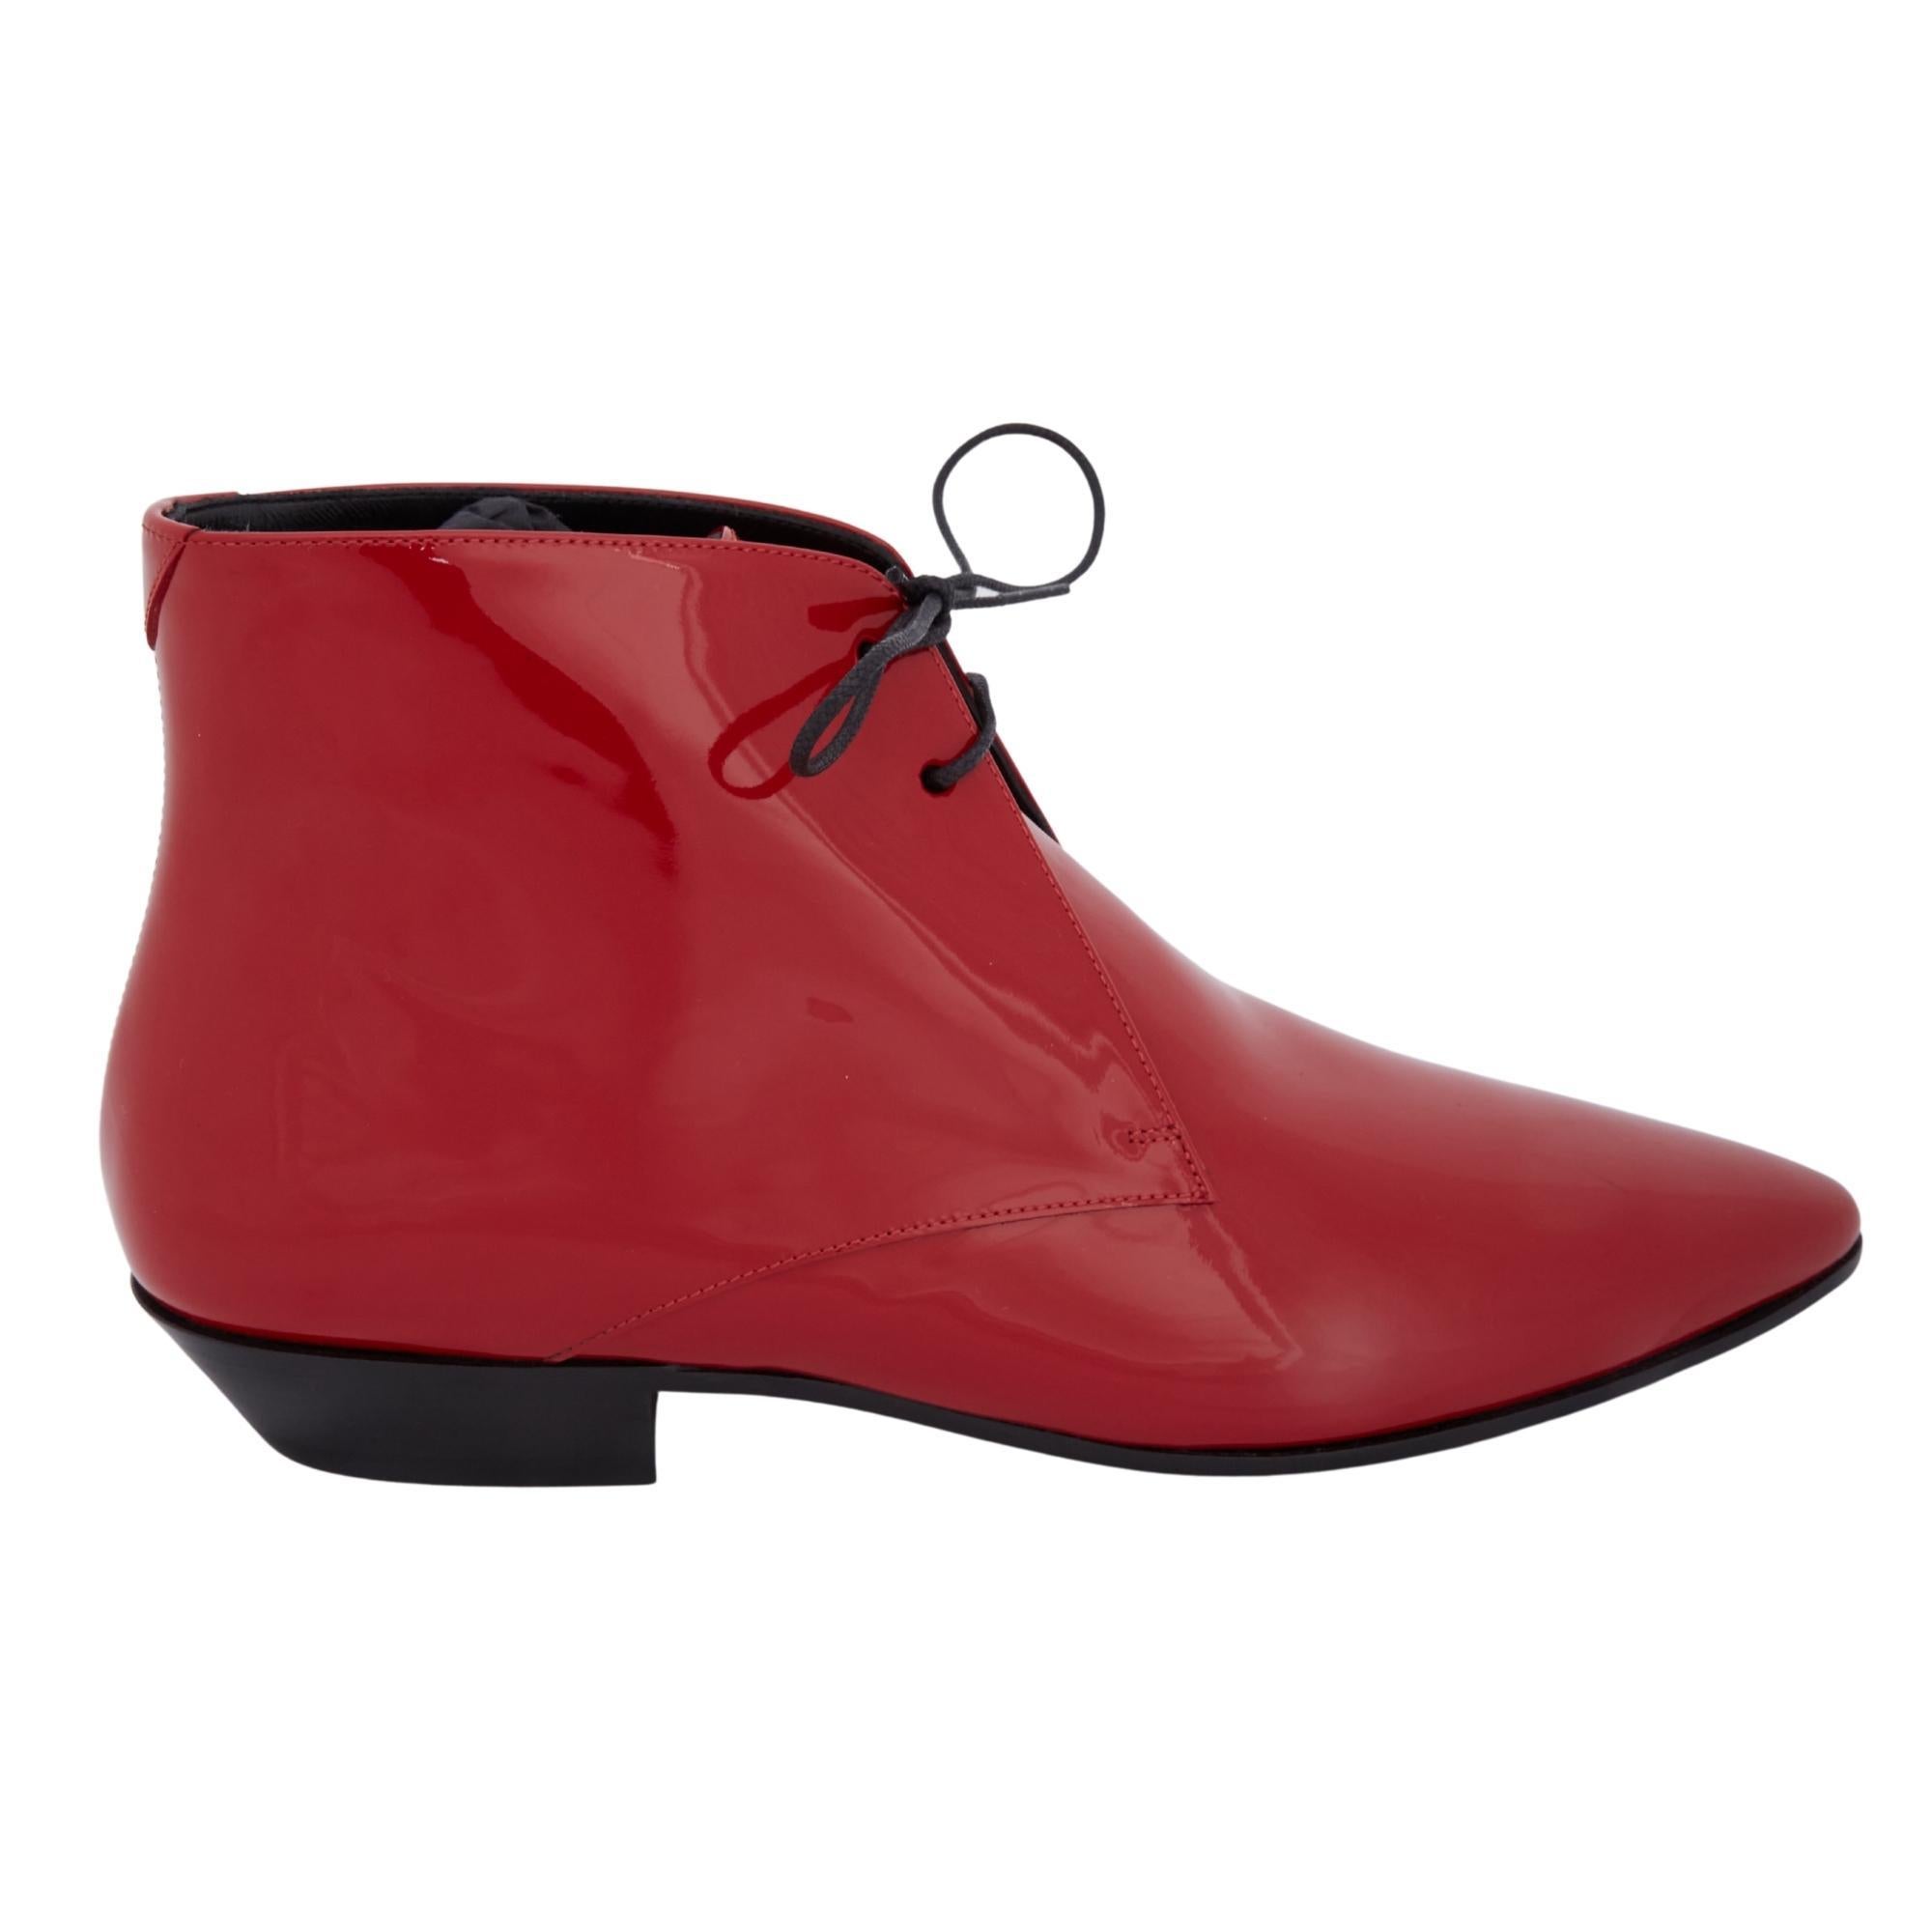 Saint Laurent Jonas Patent Red Heeled Ankle Boots (39 EU) 581845 For Sale